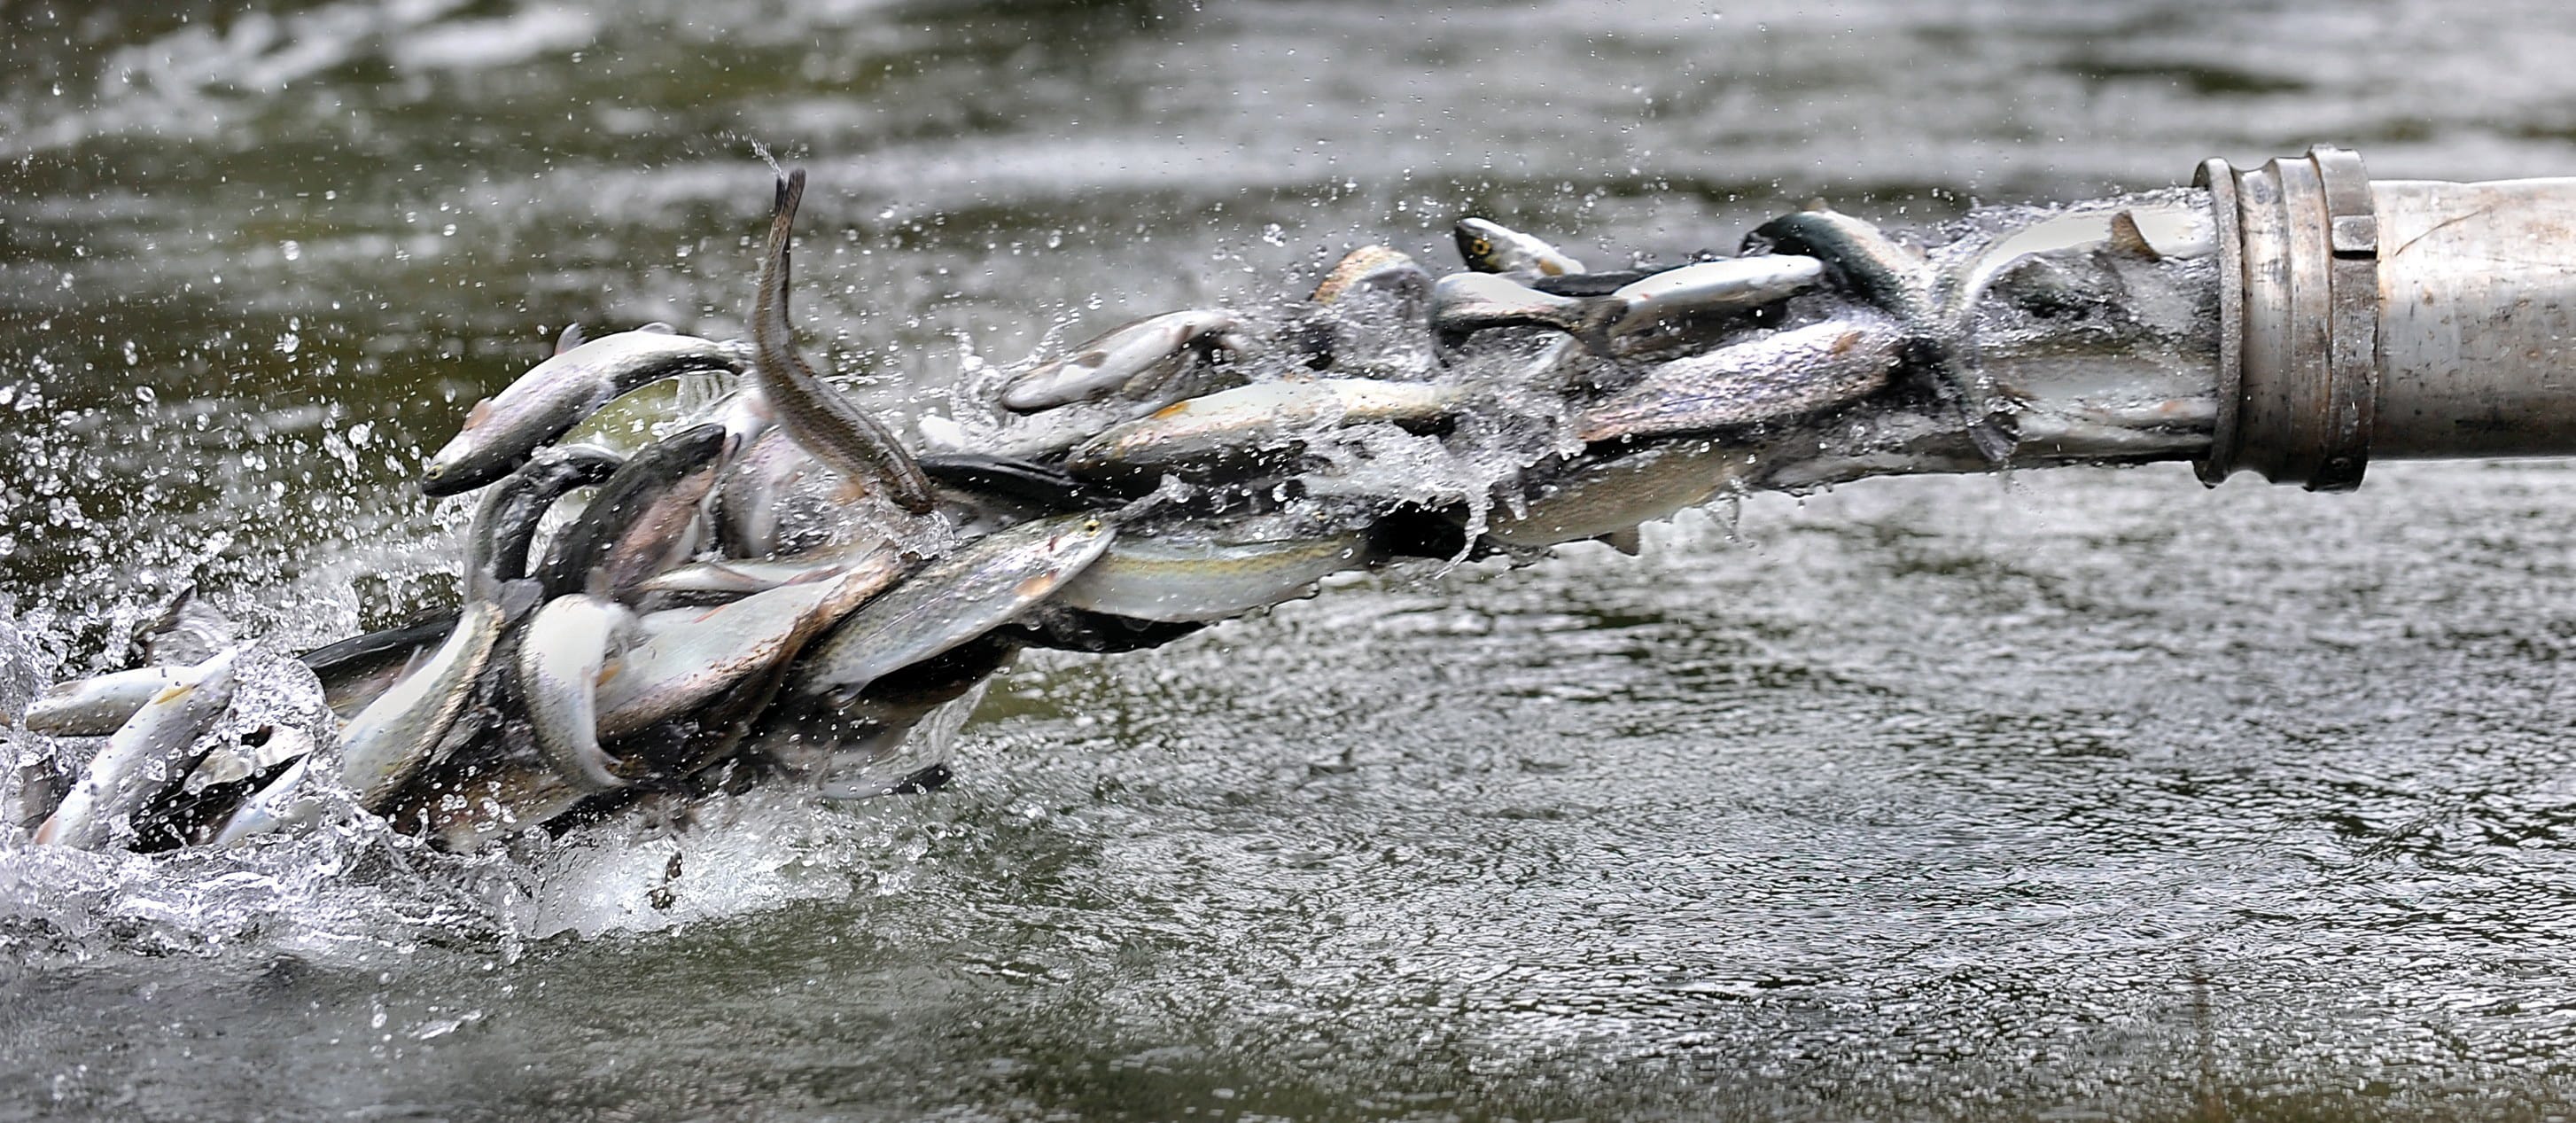 Thousands of hatchery-raised winter steelhead are released from an Oregon Department of Fish and Wildlife truck into Carberry Creek outside Ruch, Ore.